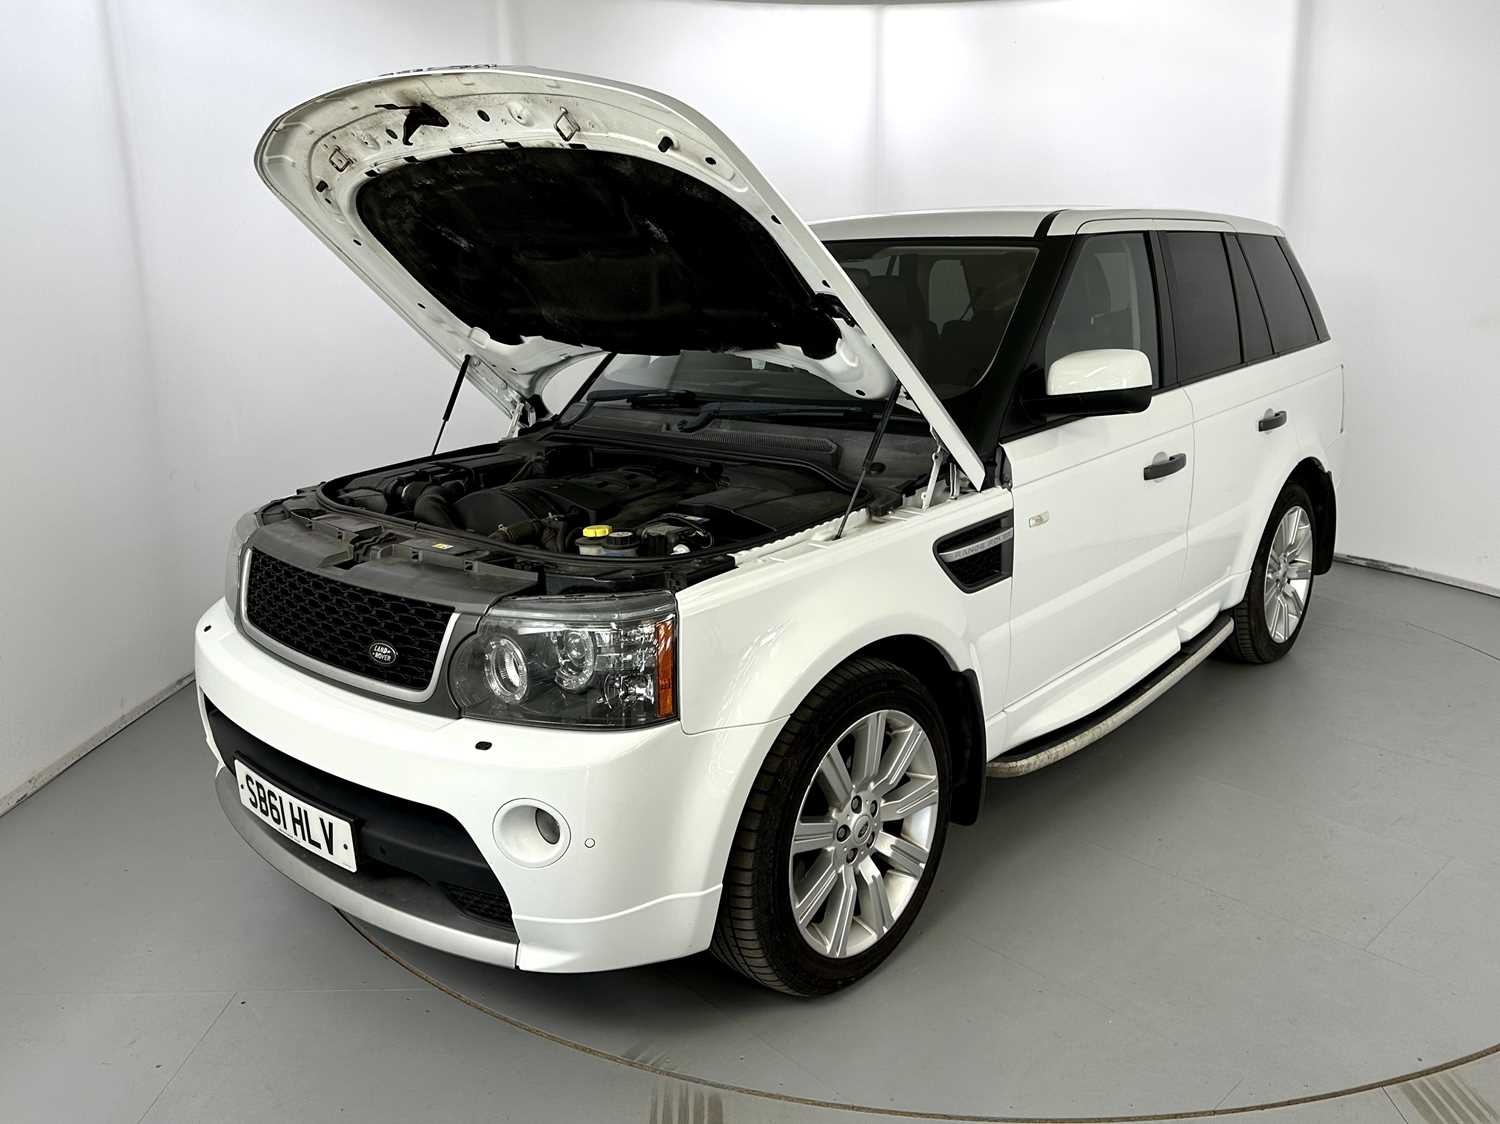 2011 Land Rover Range Rover Sport Stormer Edition  - Image 32 of 33